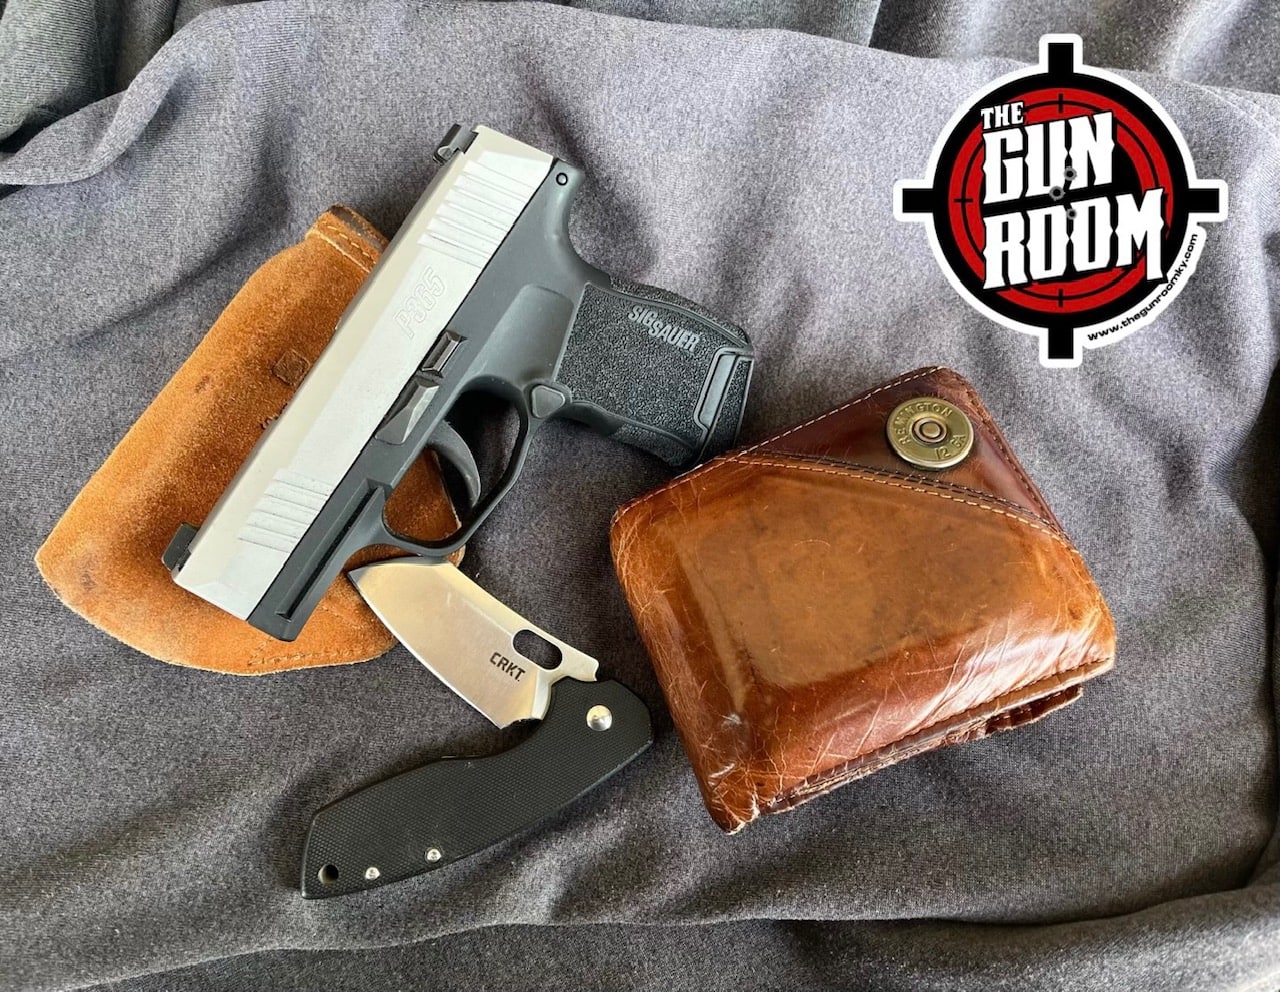 Discover The Gun Room: Your #1 Destination for Affordable Firearms, Accessories, Knives, and Optics 2 RDA Pic EDC jpg